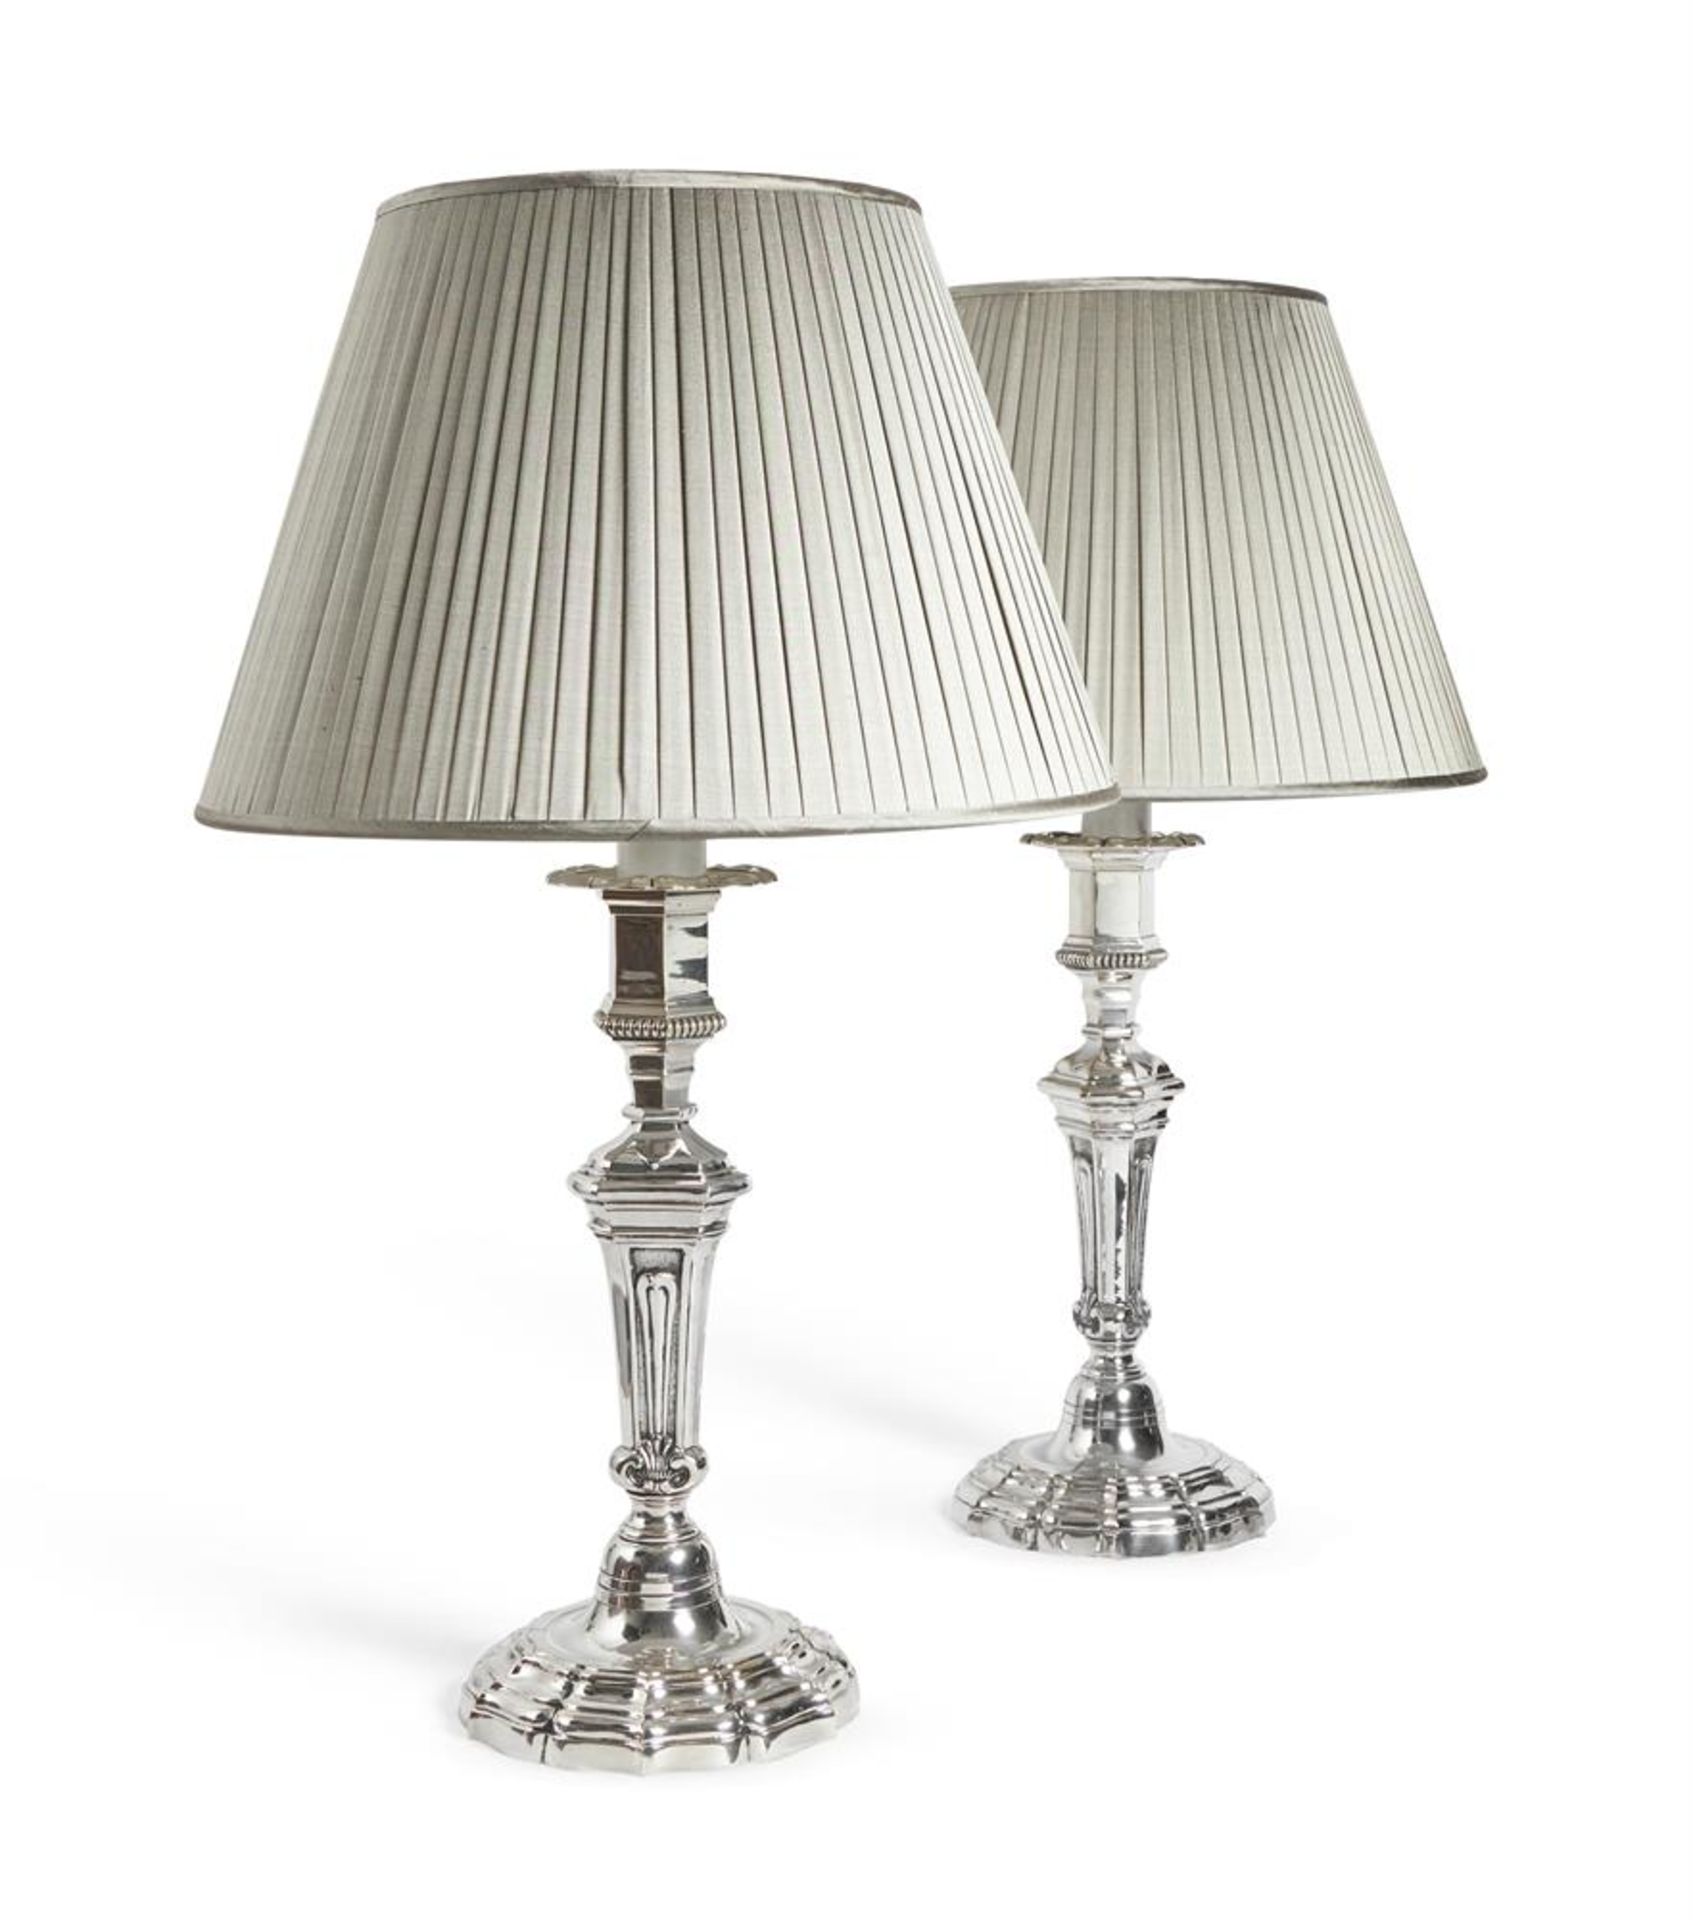 A PAIR OF SILVER PLATED CANDLESTICKS, EARLY 20TH CENTURY